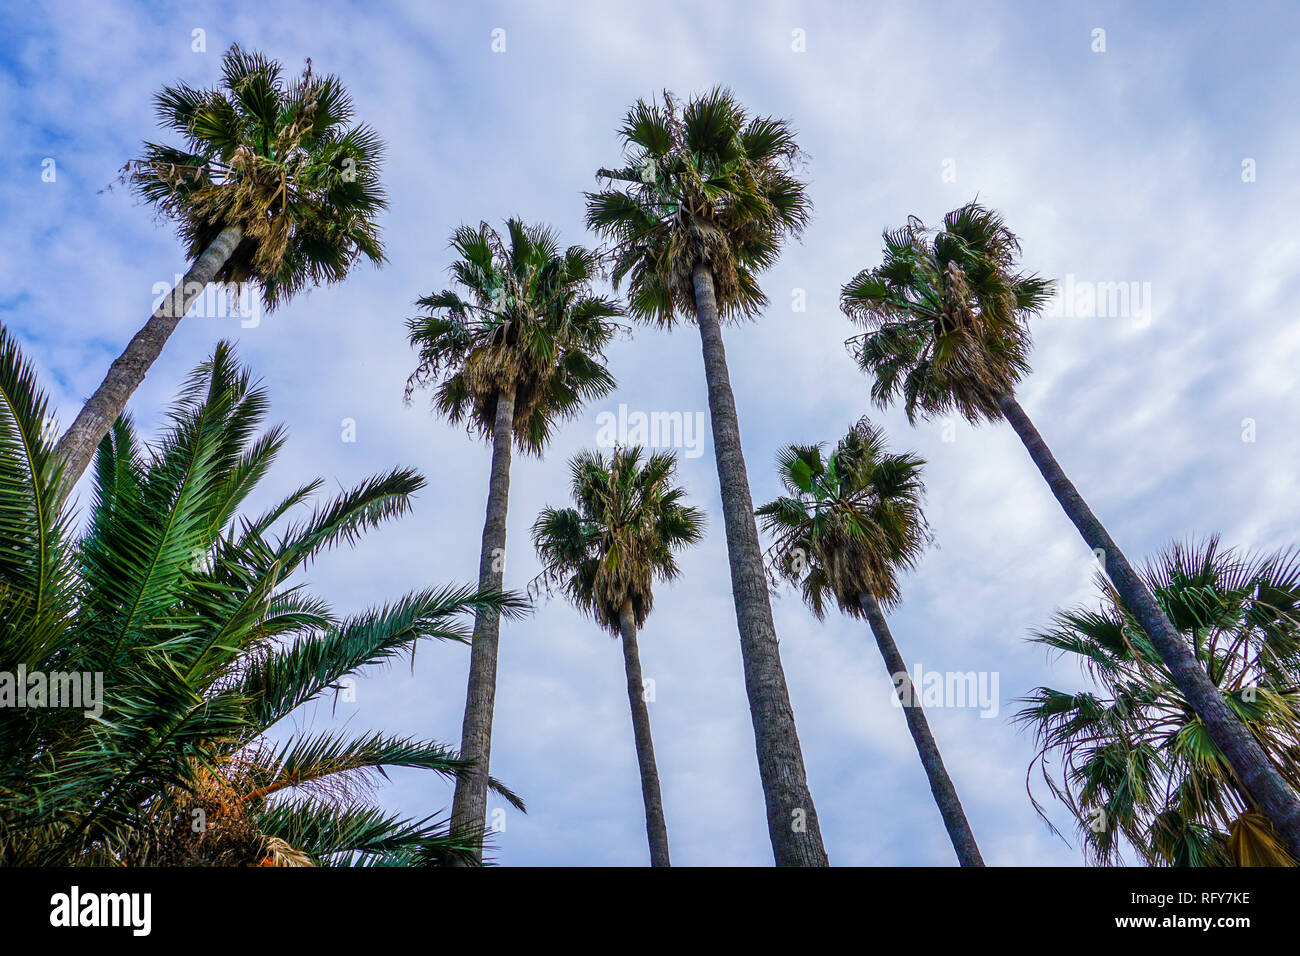 Palm trees at Cannes on the cote d'azur. Stock Photo